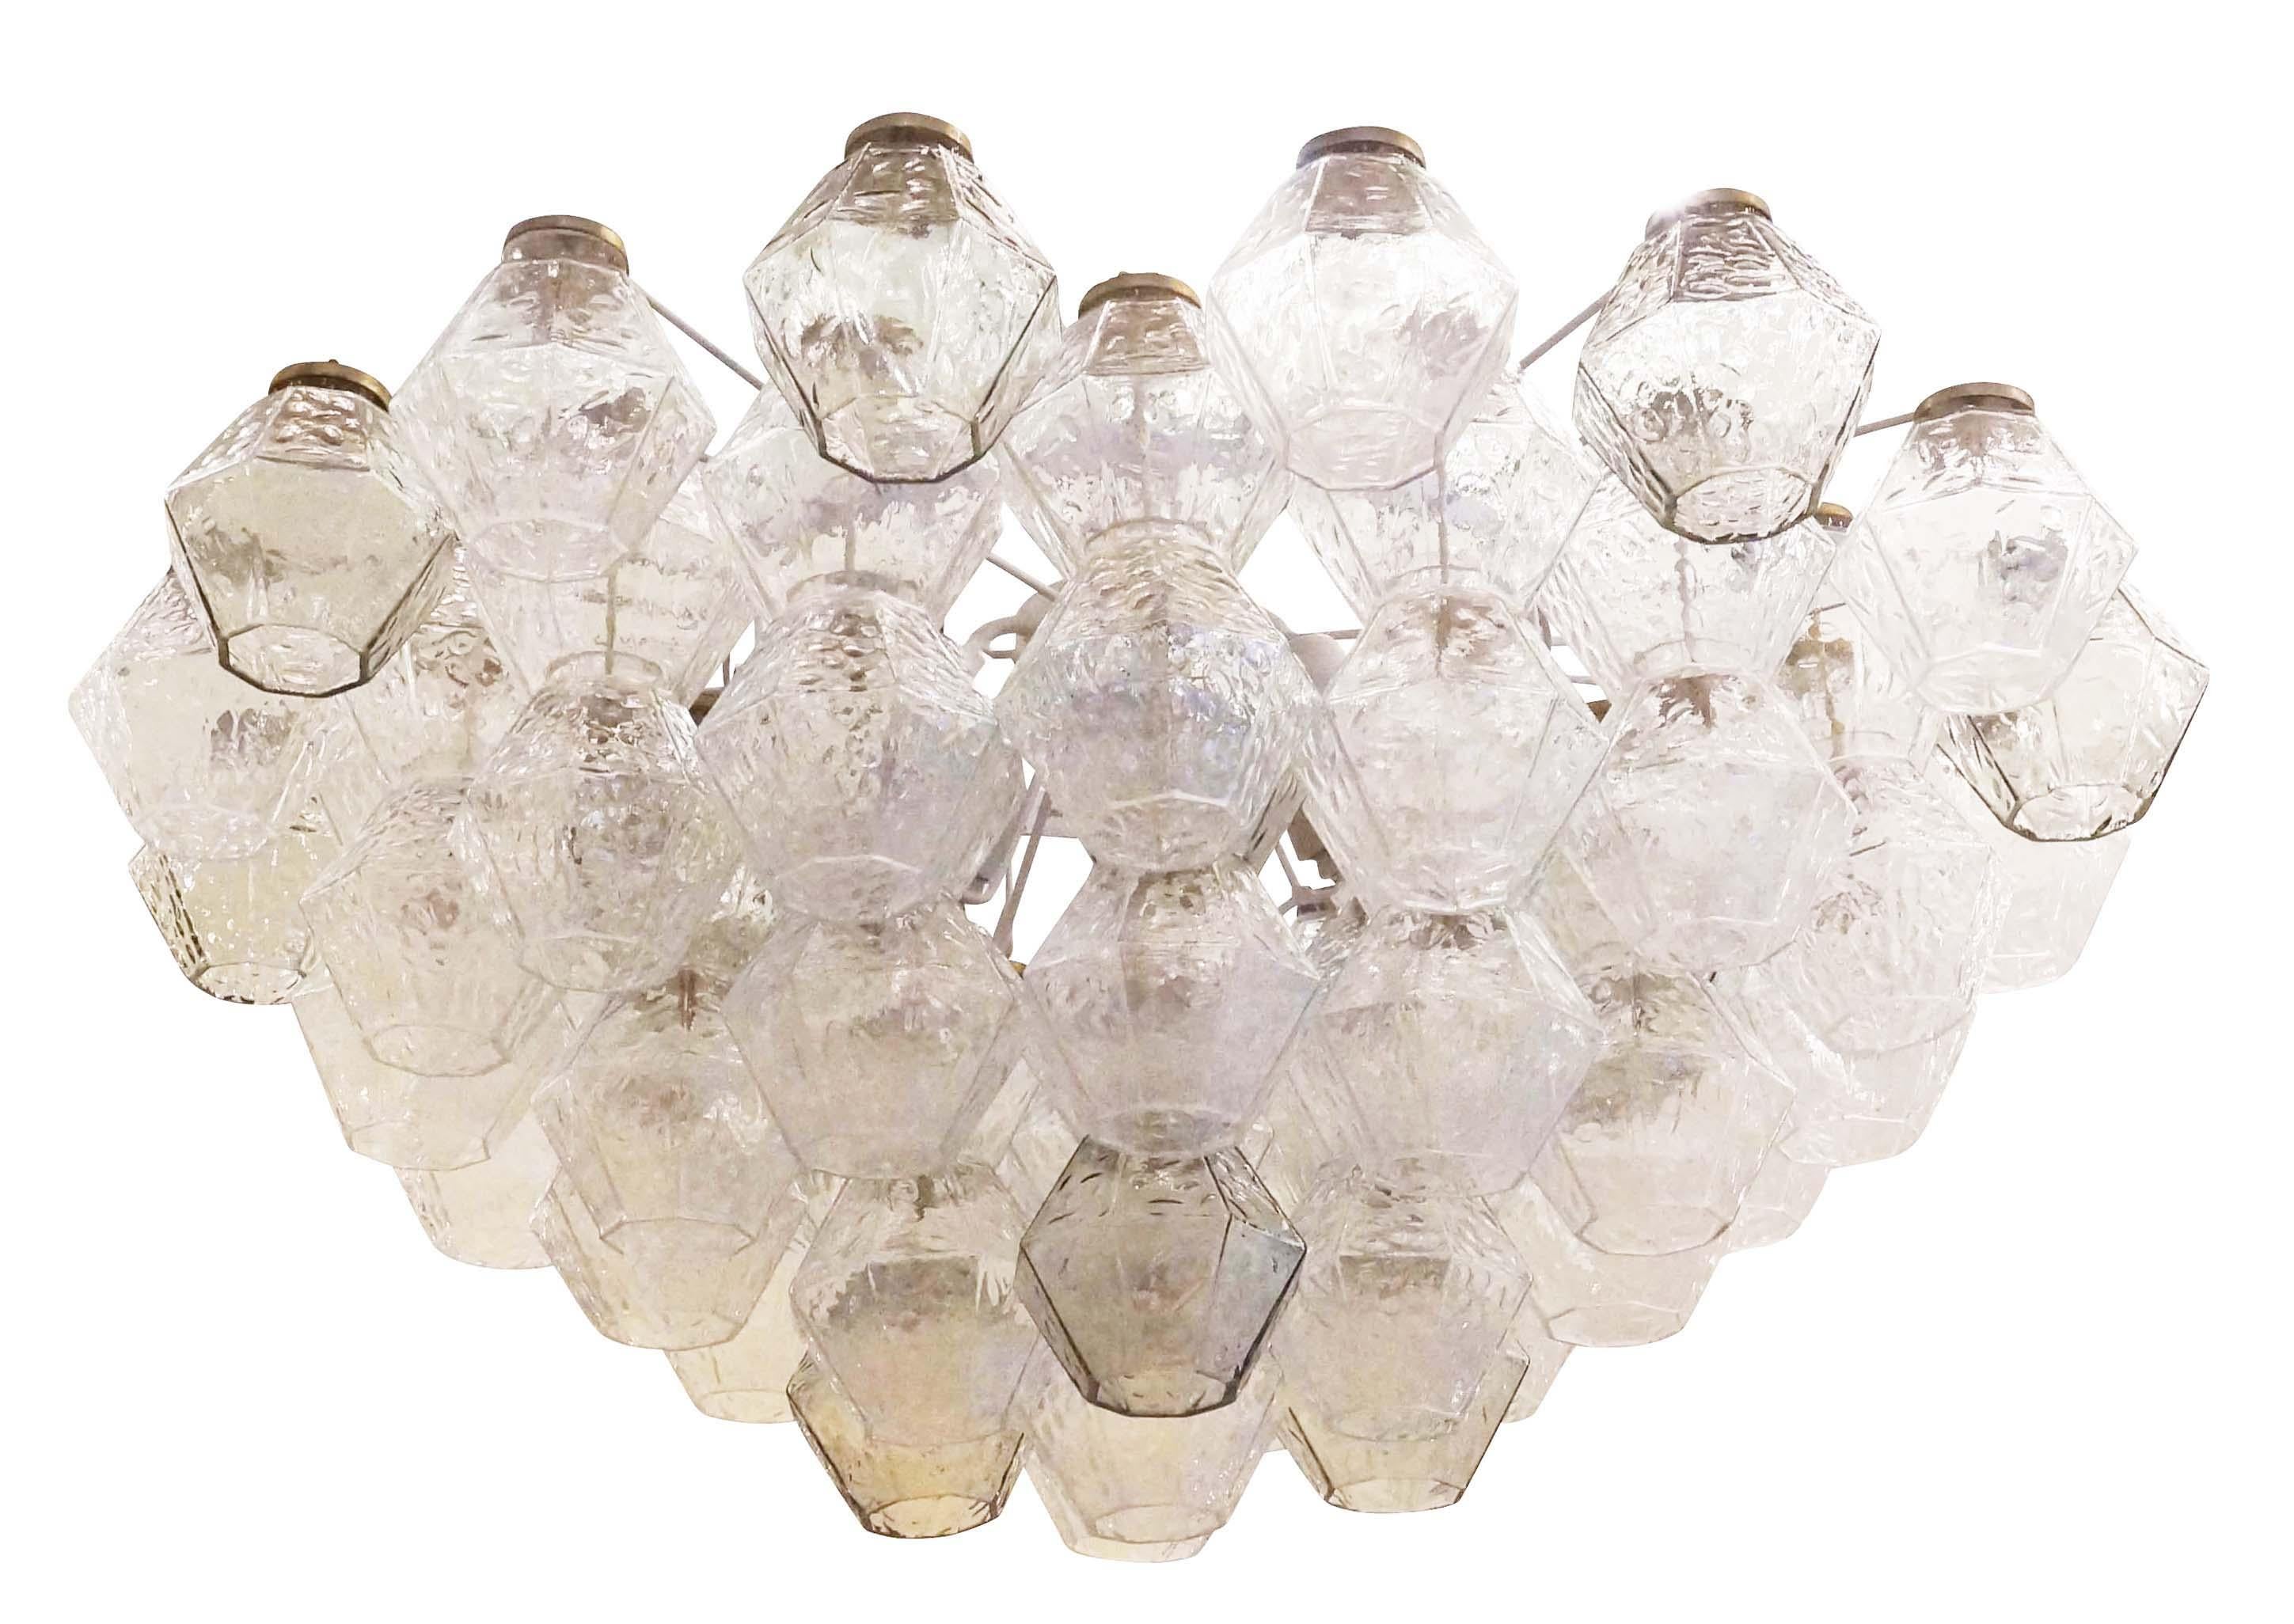 Italian Mid-Century chandelier by Salviati composed of clear and smoked Murano glasses. White frame holding 7 E26 sockets. Matching wall lights also available. 

Condition: Excellent vintage condition, minor wear consistent with age and